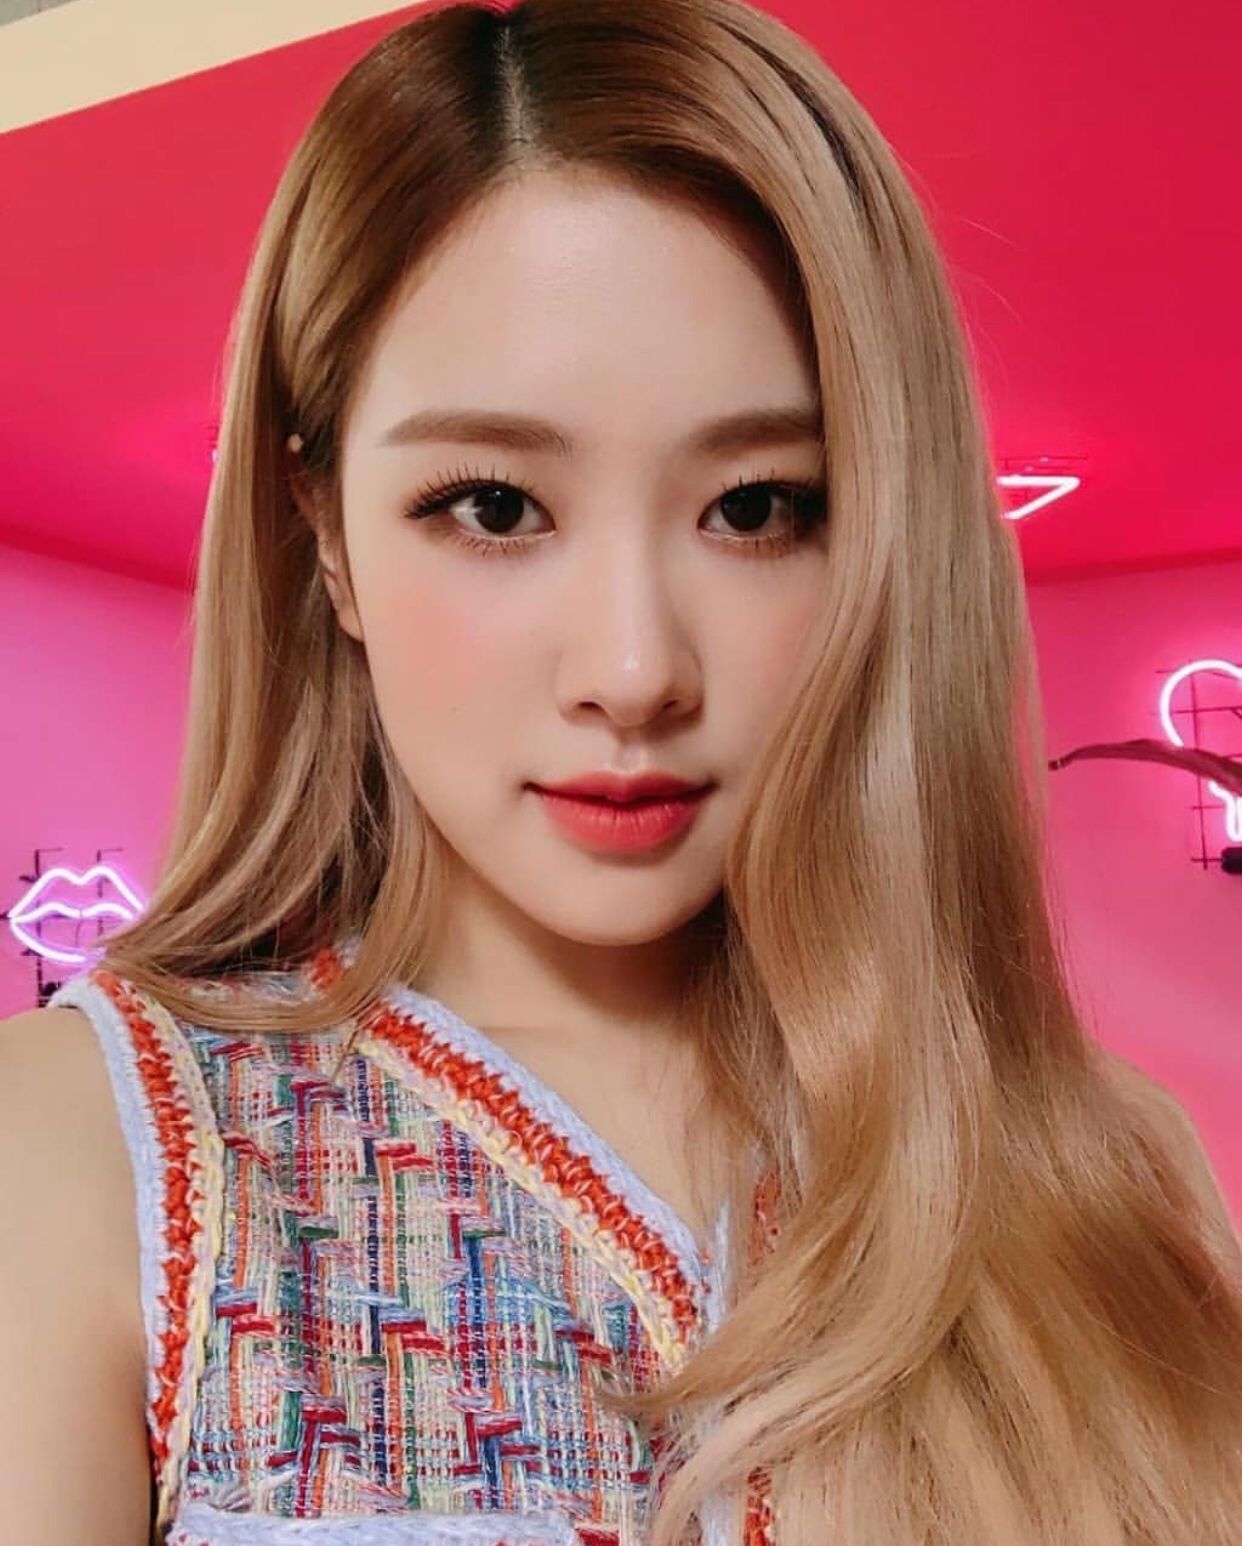 rose-blackpink-explains-how-to-have-flawless-white-skin2